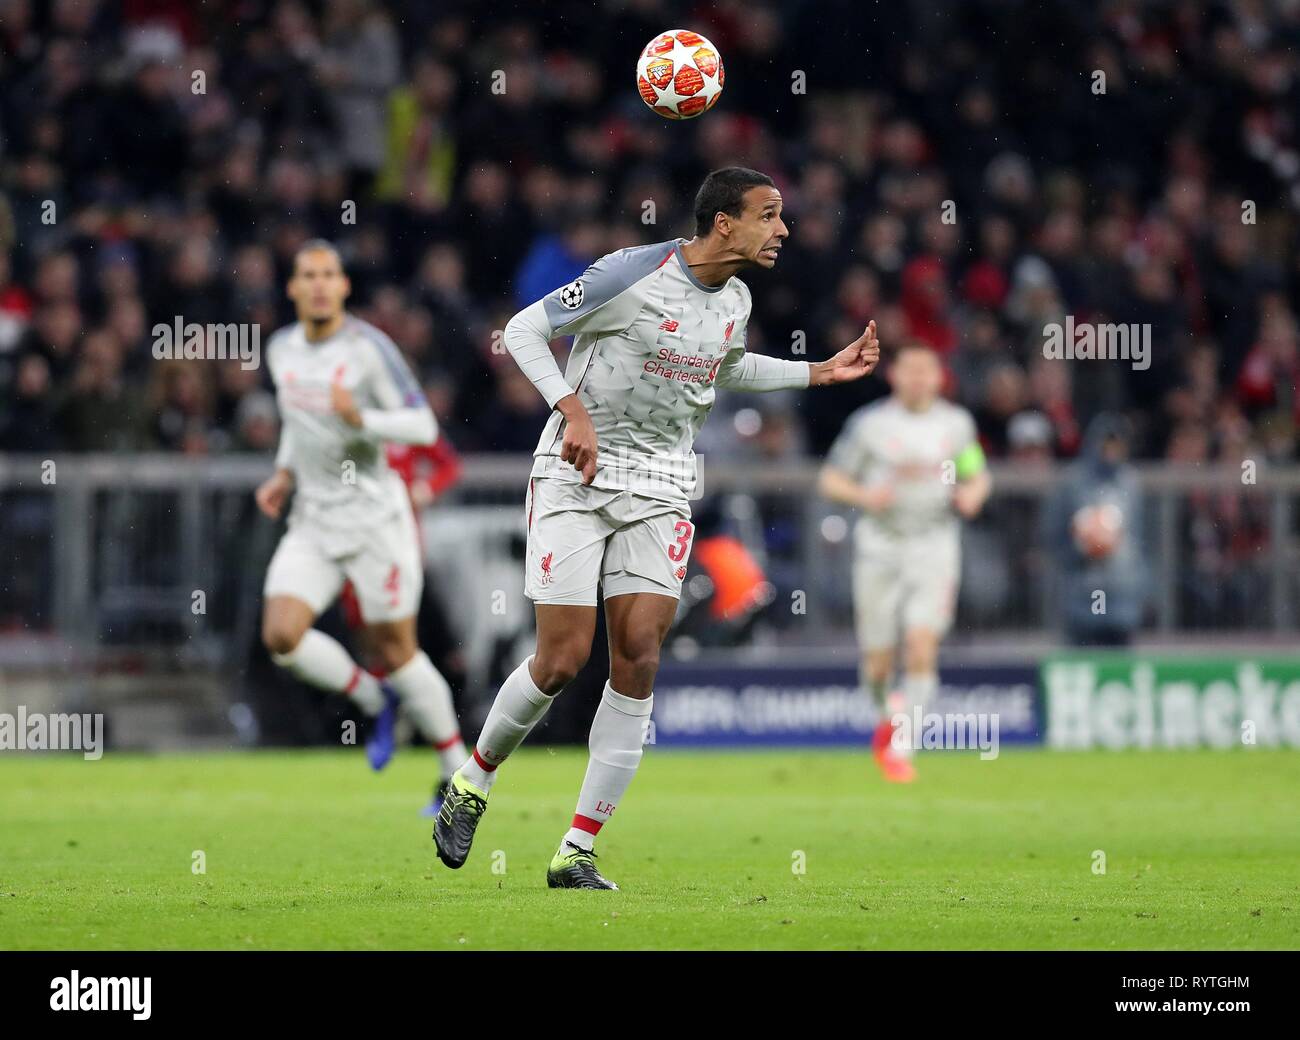 Fc bayern munich liverpool fc hi-res stock photography and images - Alamy